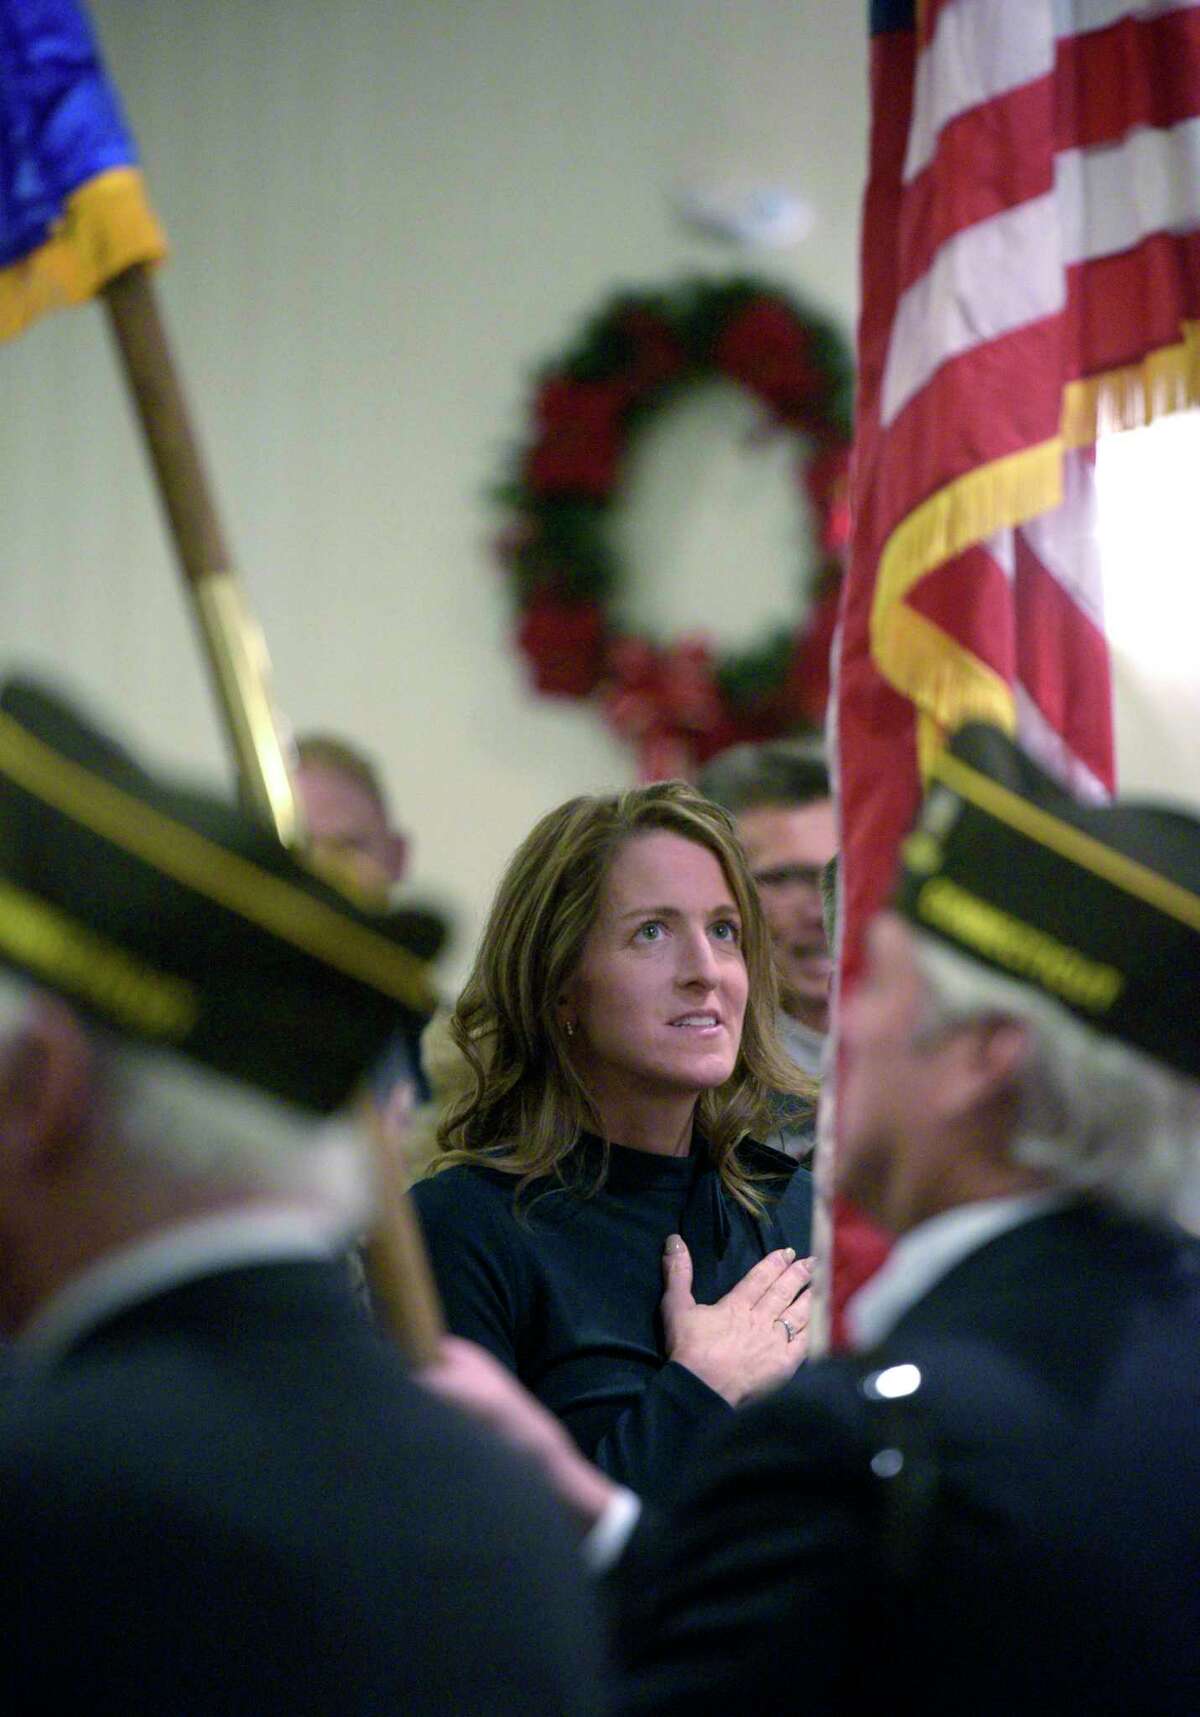 Tara Carr say the Pledge of Allegiance during the Town of Brookfield, inauguration and swearing-in ceremony, Friday night at St Marguerite Bourgeoys church, Brookfield, Conn, December 3, 2021. Carr was elected First Selectman.